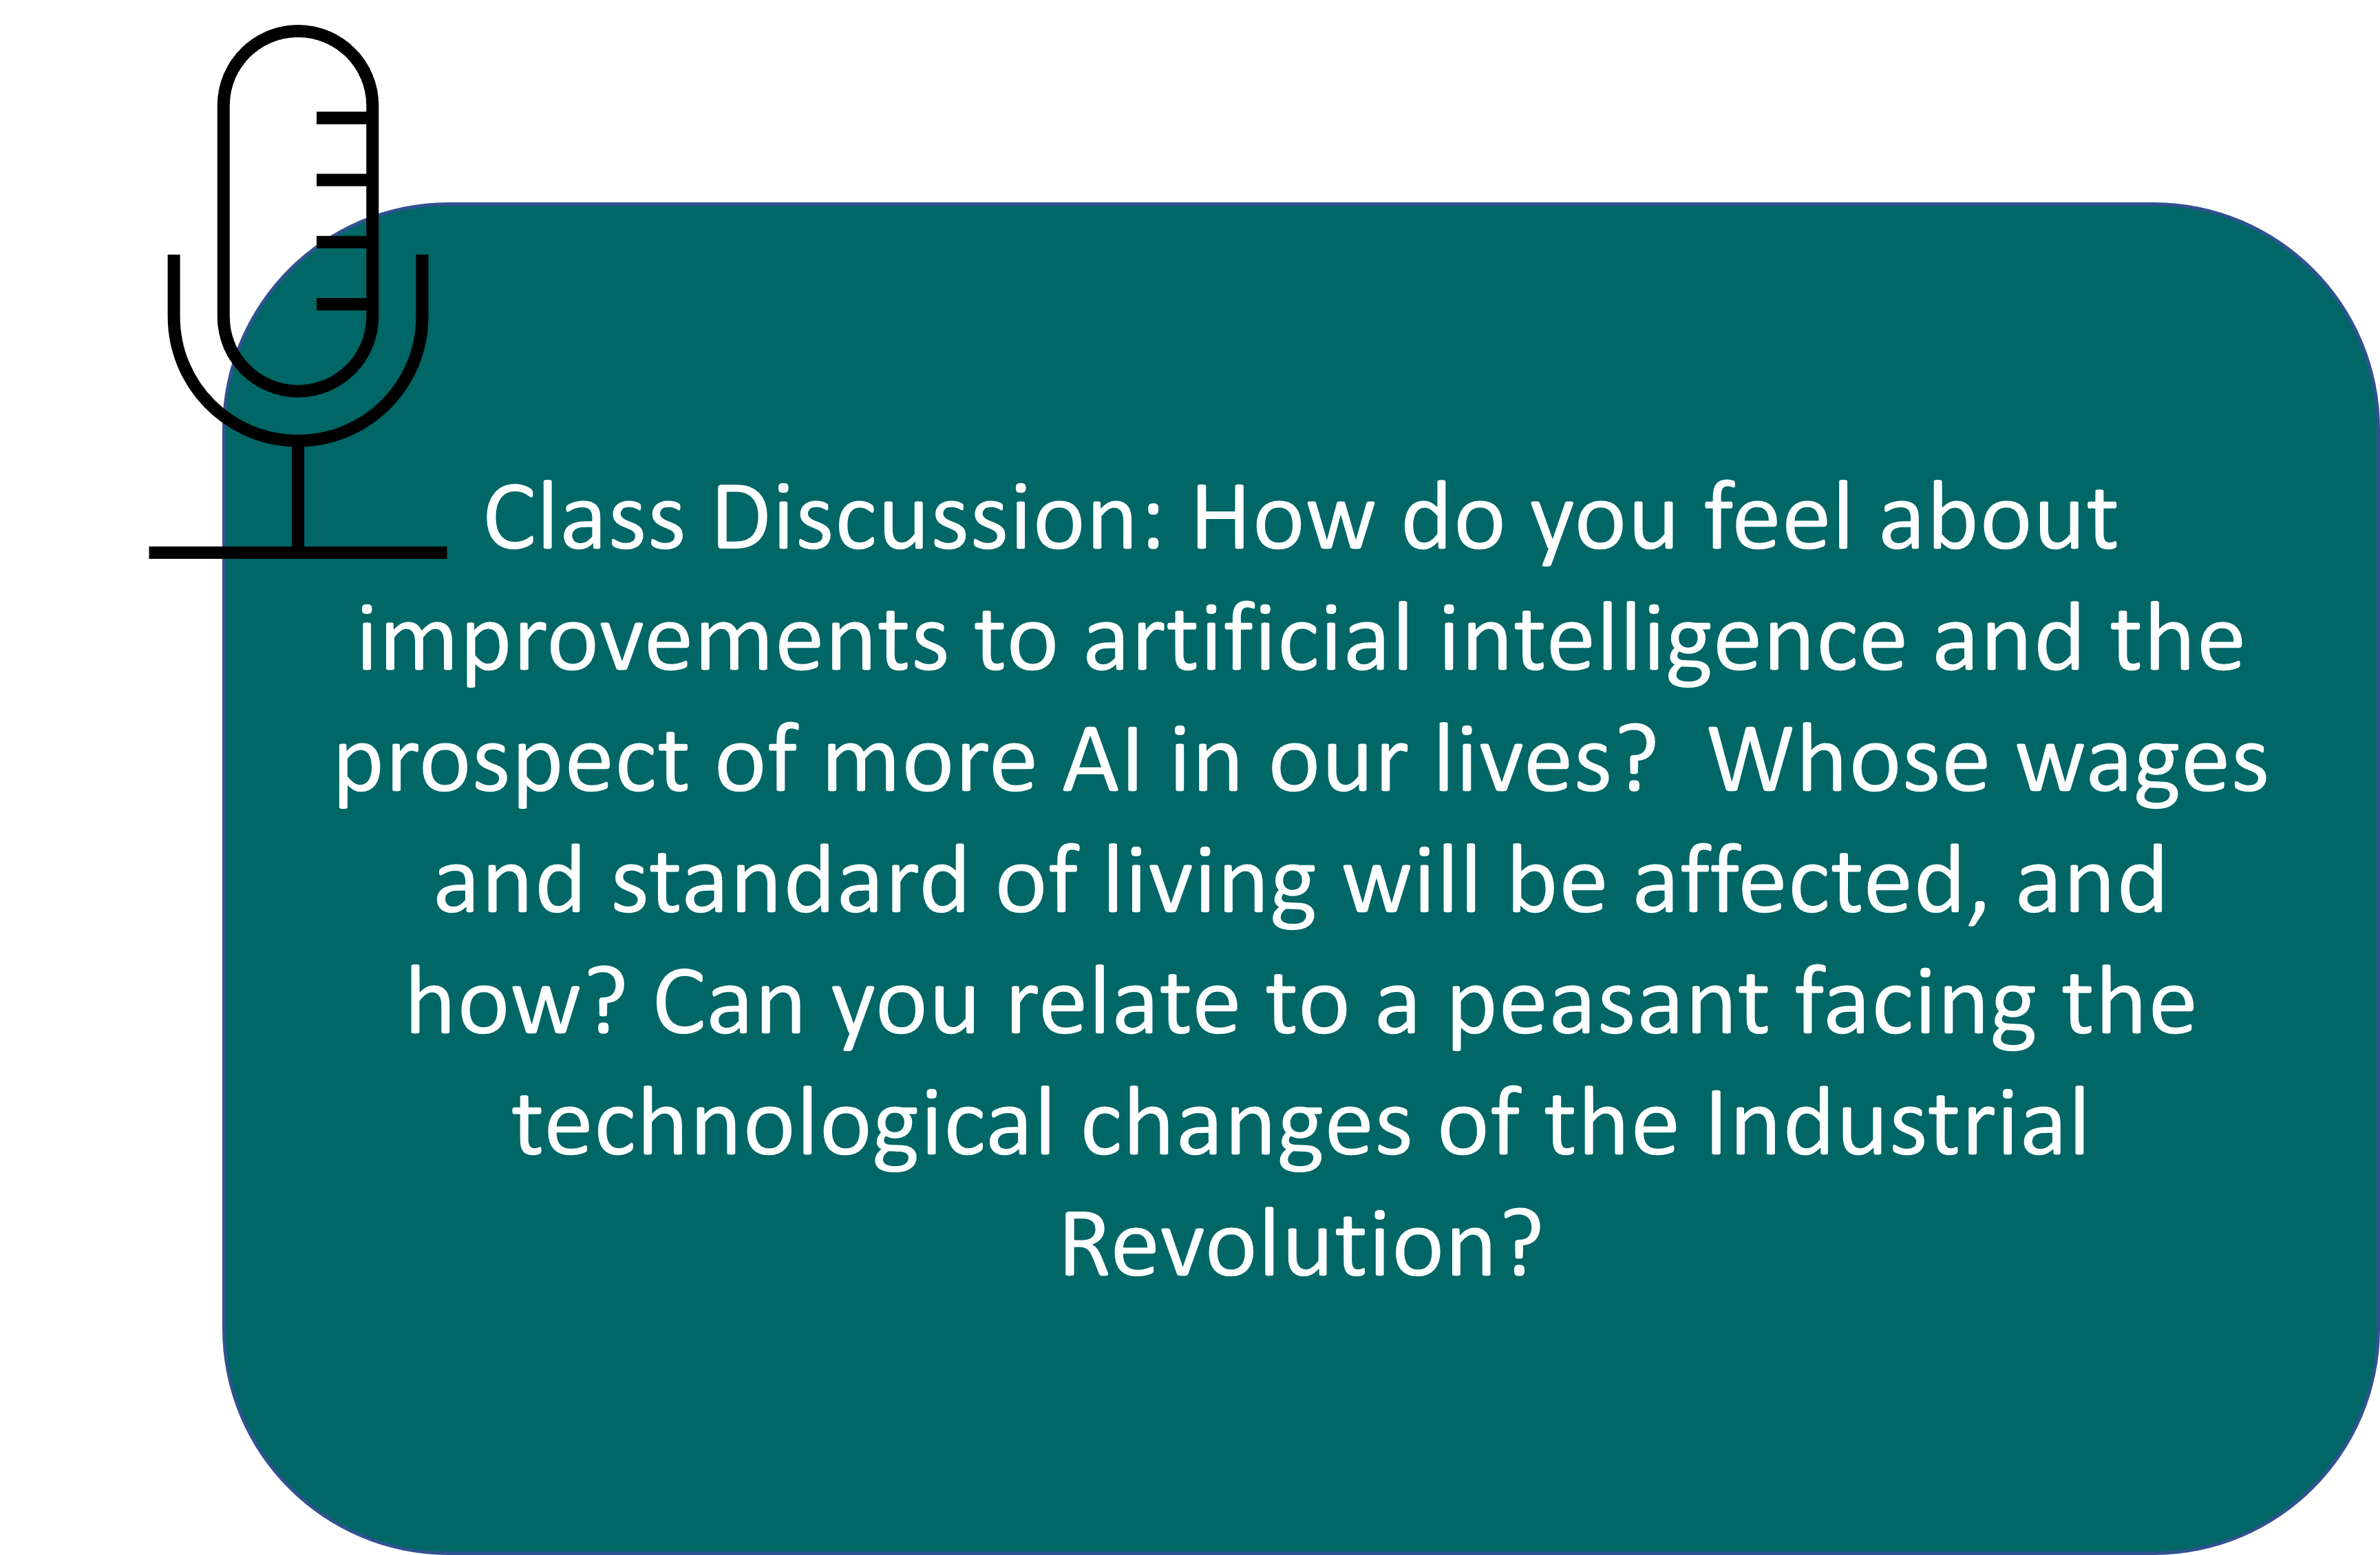 Class Discussion: How do you feel about improvements to artificial intelligence and the prospect of more AI in our lives? Whose wages and standard of living will be affected, and how? Can you relate to a peasant facing the technological changes of the Industrial Revolution?